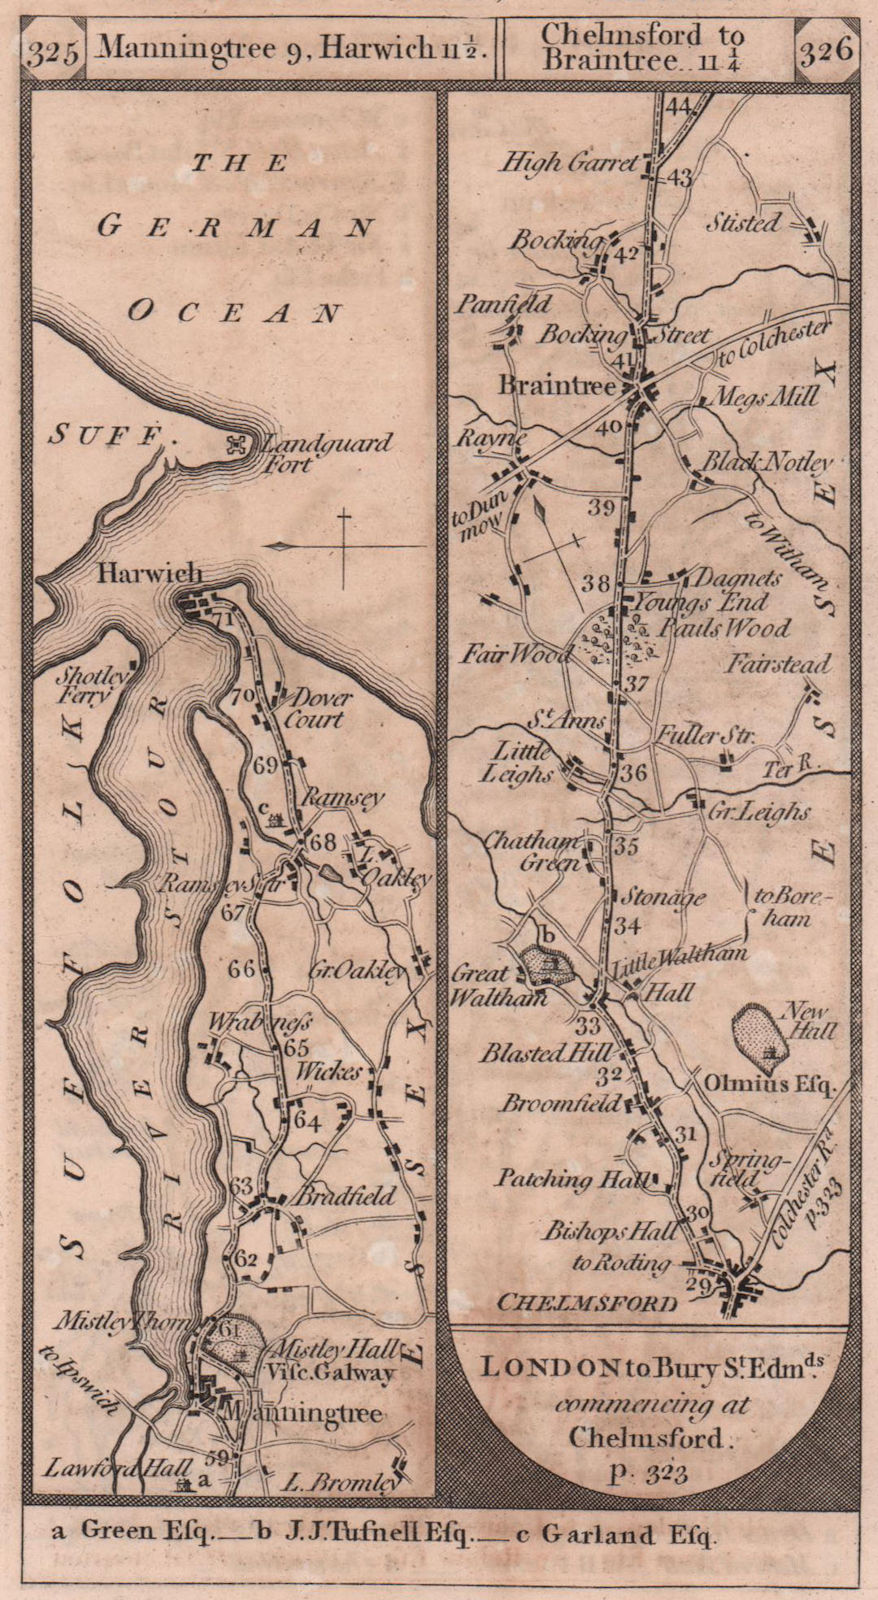 Associate Product Manningtree - Harwich. Chelmsford - Braintree road strip map PATERSON 1803